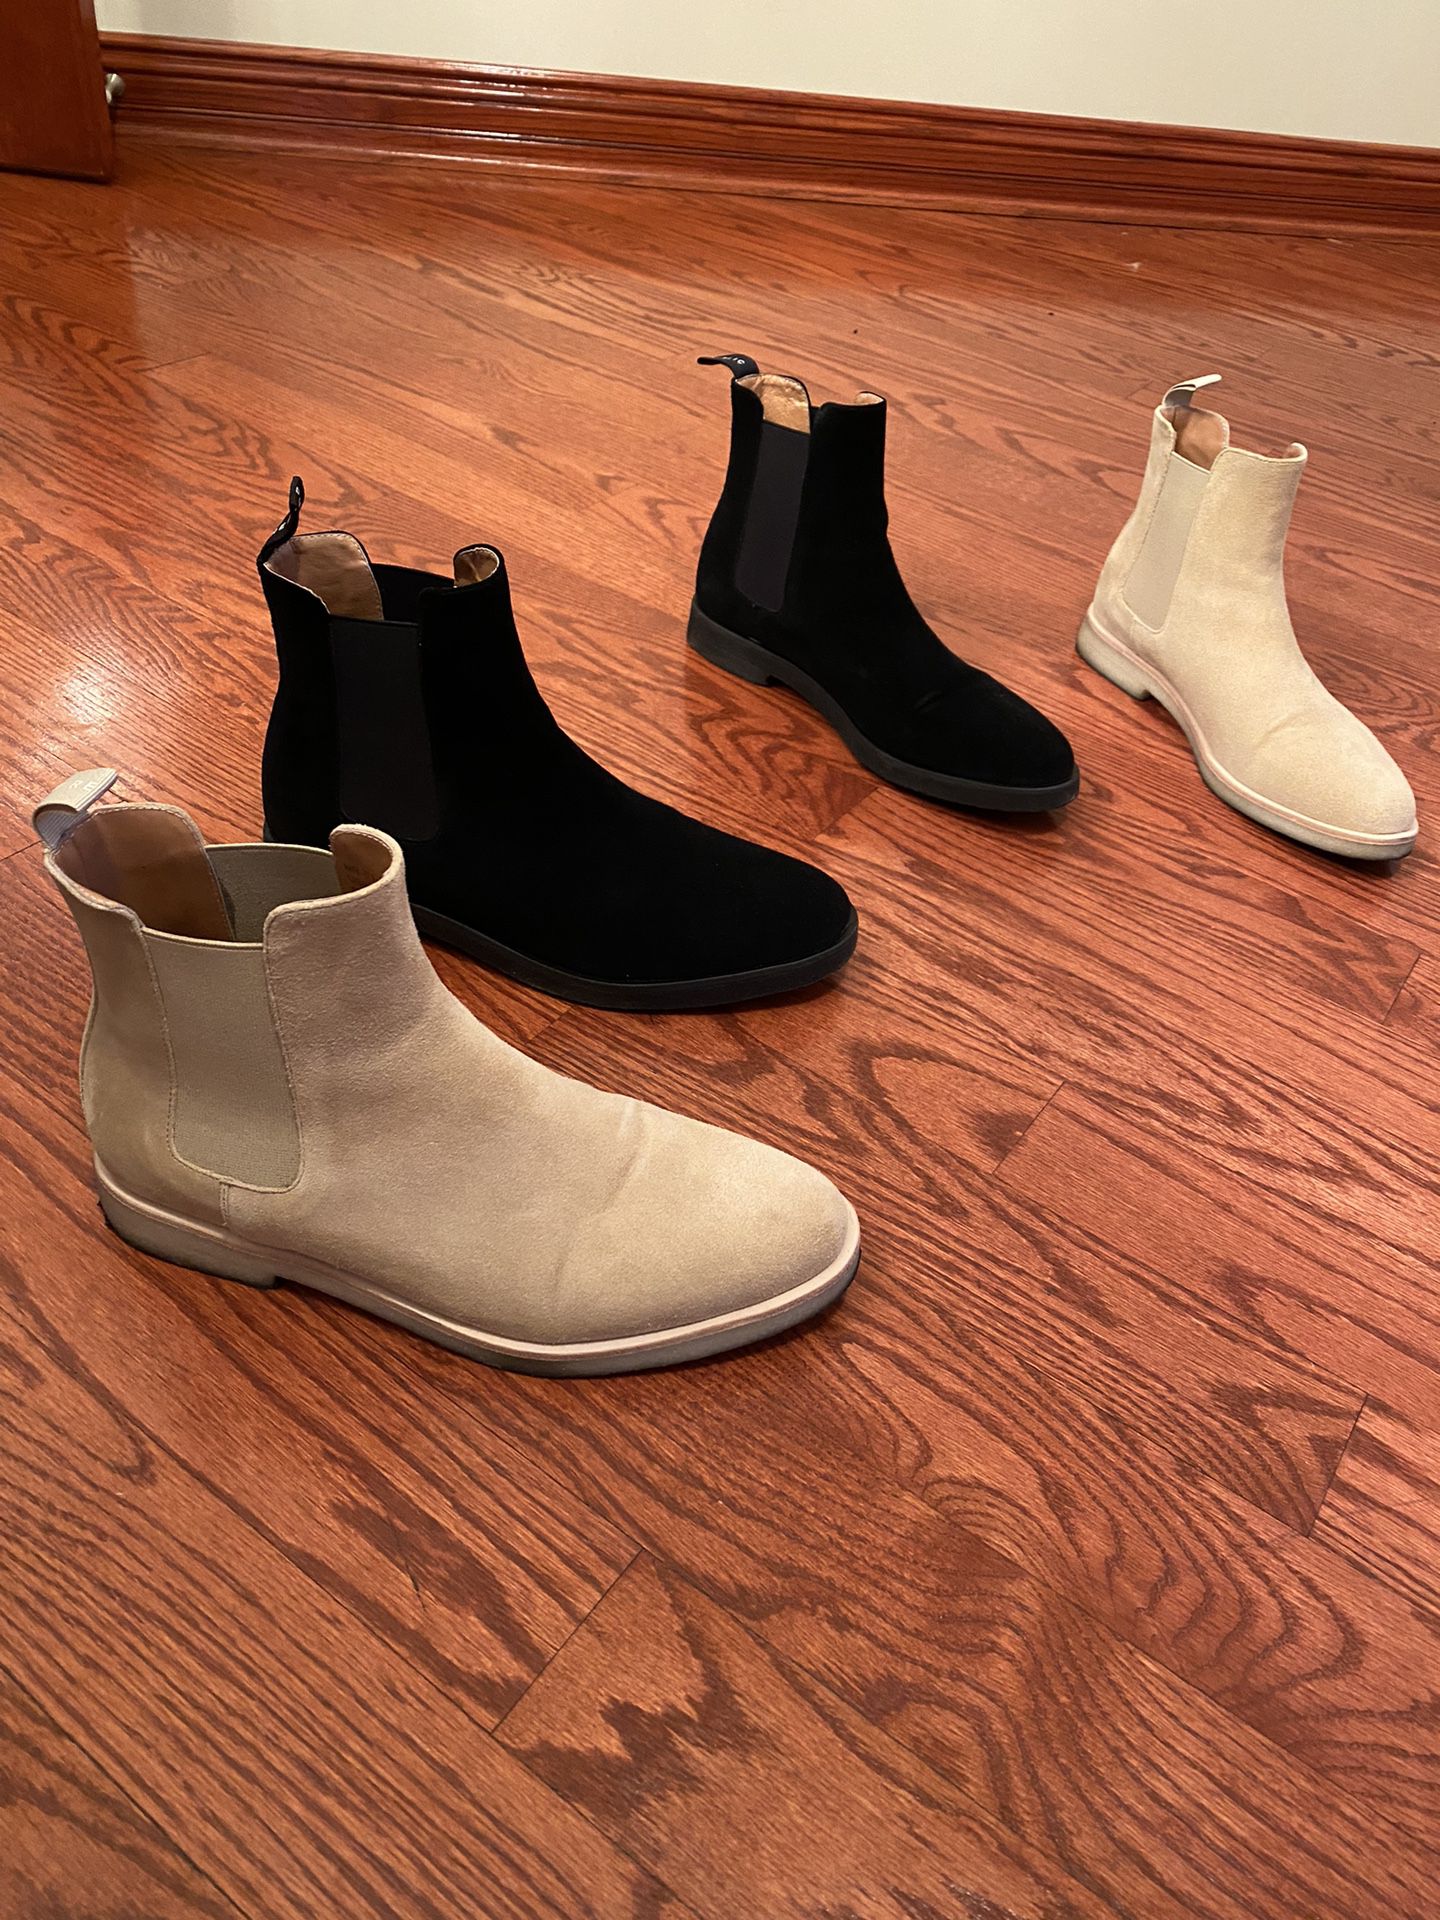 Chelsea Boots for Sale in Willow Springs, - OfferUp